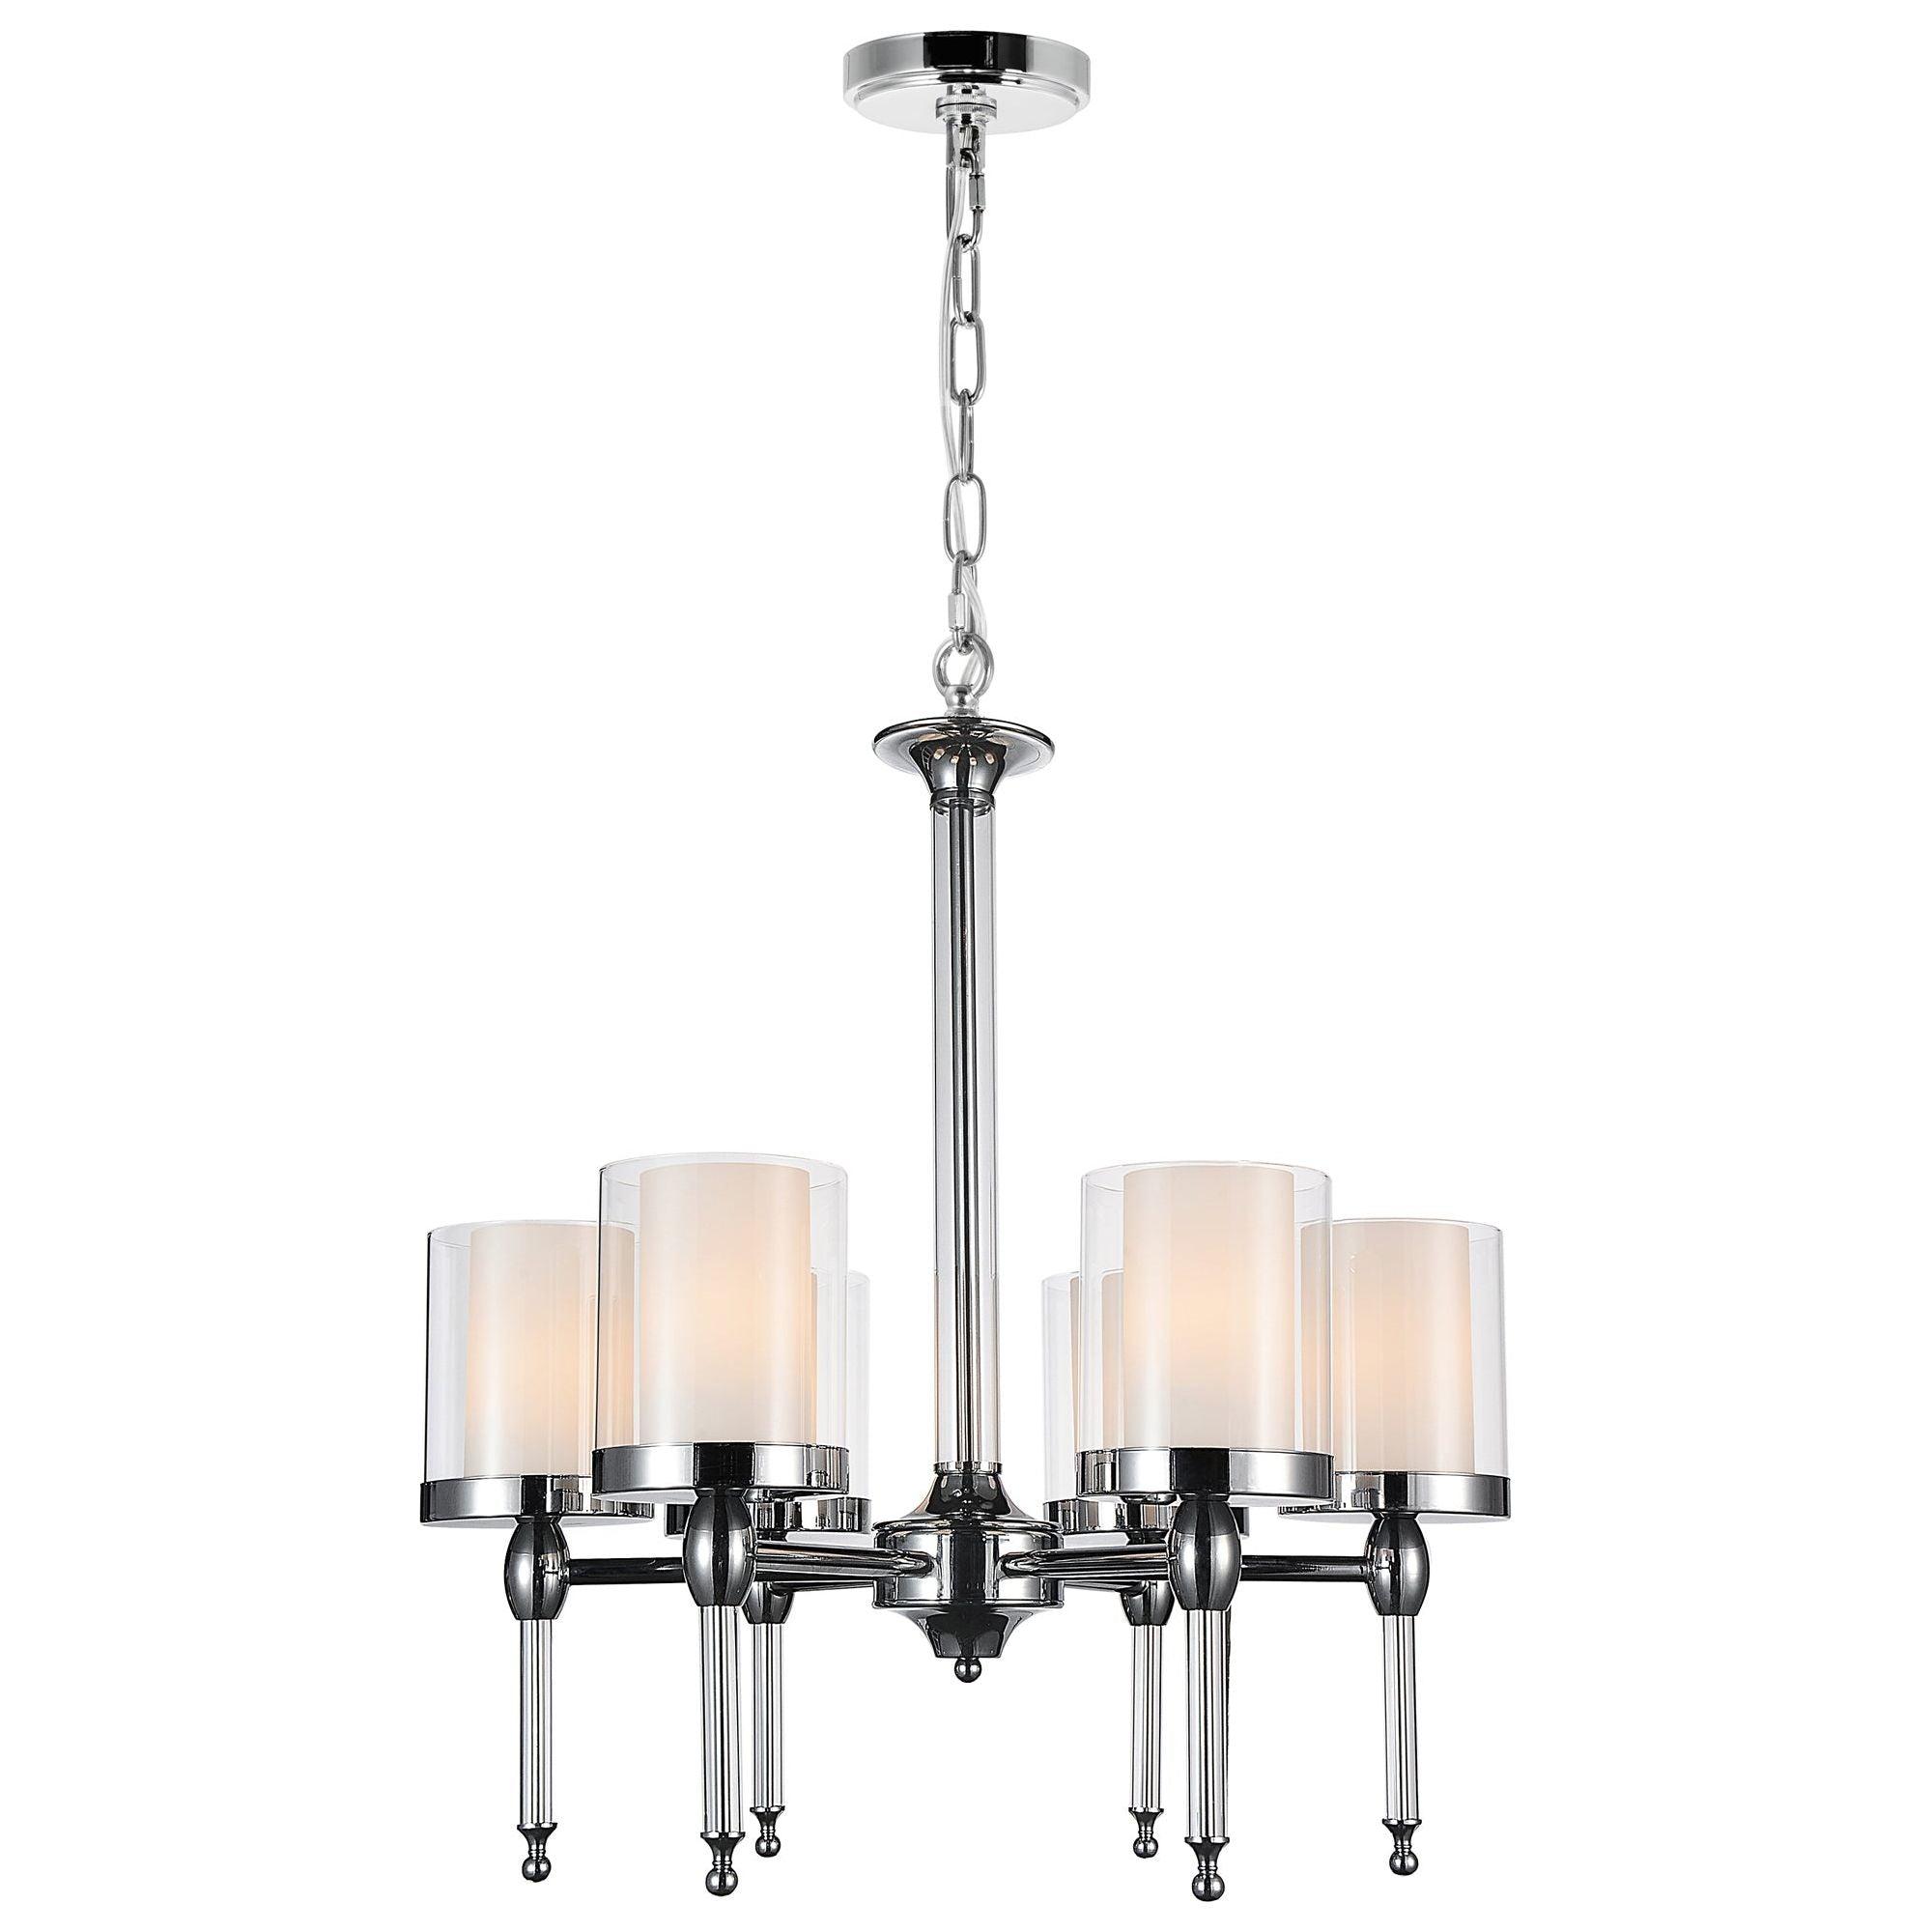 CWI - Maybelle Chandelier - Lights Canada